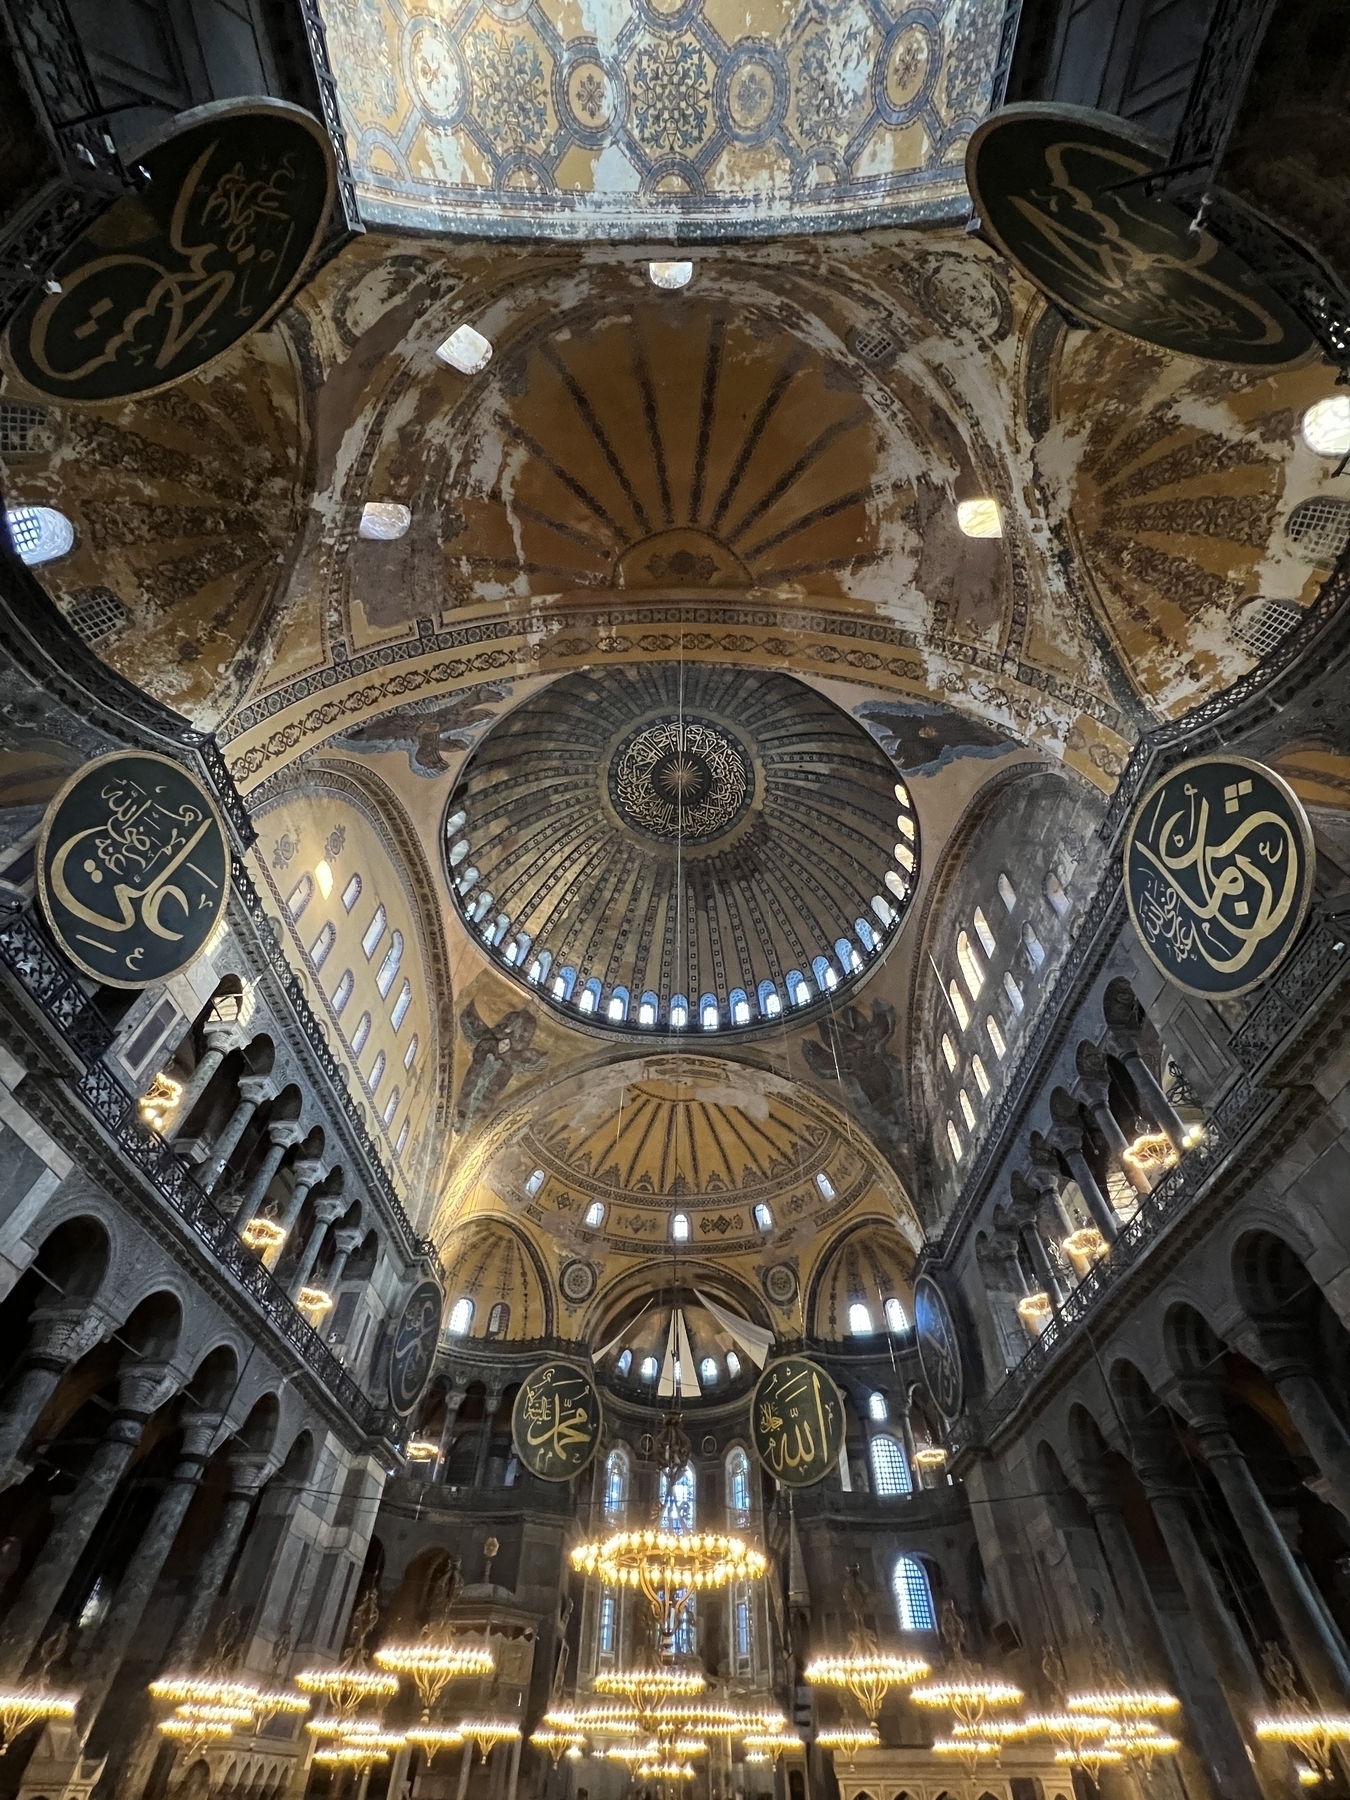 Wide angle showing the two half domes supporting the big dome of the ceiling of the Hagia Sophia